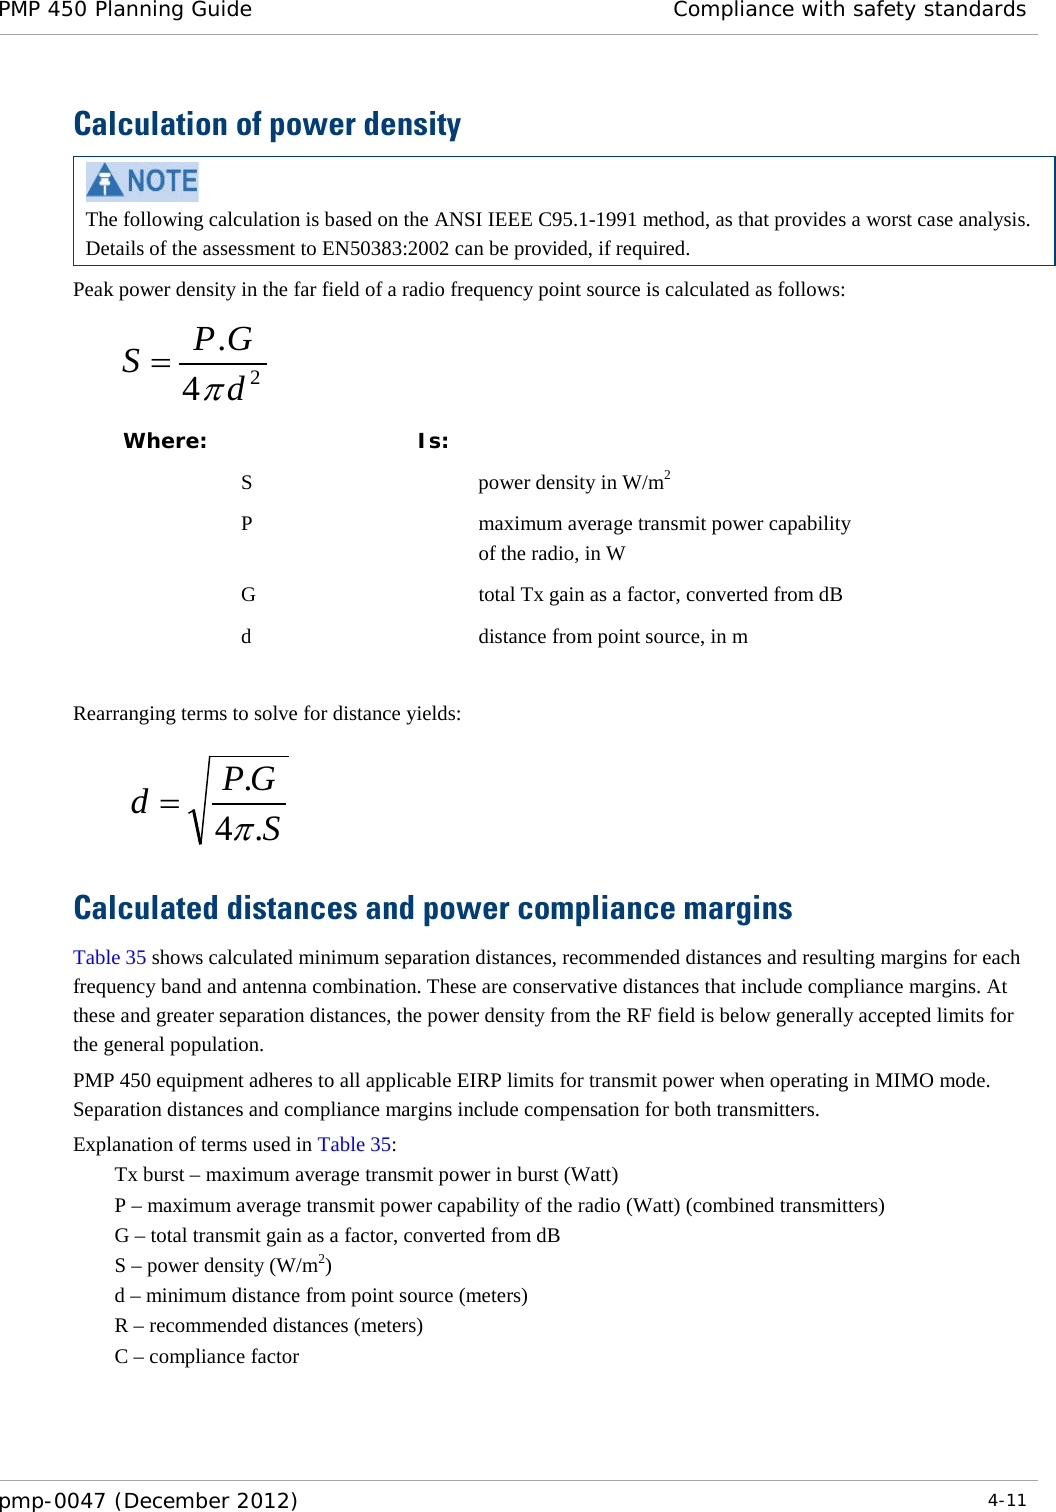 PMP 450 Planning Guide Compliance with safety standards  pmp-0047 (December 2012)  4-11  Calculation of power density  The following calculation is based on the ANSI IEEE C95.1-1991 method, as that provides a worst case analysis.  Details of the assessment to EN50383:2002 can be provided, if required. Peak power density in the far field of a radio frequency point source is calculated as follows:    Where:  Is:    S    power density in W/m2   P    maximum average transmit power capability of the radio, in W   G    total Tx gain as a factor, converted from dB   d    distance from point source, in m  Rearranging terms to solve for distance yields:     Calculated distances and power compliance margins Table 35 shows calculated minimum separation distances, recommended distances and resulting margins for each frequency band and antenna combination. These are conservative distances that include compliance margins. At these and greater separation distances, the power density from the RF field is below generally accepted limits for the general population. PMP 450 equipment adheres to all applicable EIRP limits for transmit power when operating in MIMO mode.  Separation distances and compliance margins include compensation for both transmitters. Explanation of terms used in Table 35: Tx burst – maximum average transmit power in burst (Watt) P – maximum average transmit power capability of the radio (Watt) (combined transmitters) G – total transmit gain as a factor, converted from dB S – power density (W/m2) d – minimum distance from point source (meters) R – recommended distances (meters) C – compliance factor    24.dGPSπ=SGPd.4.π=